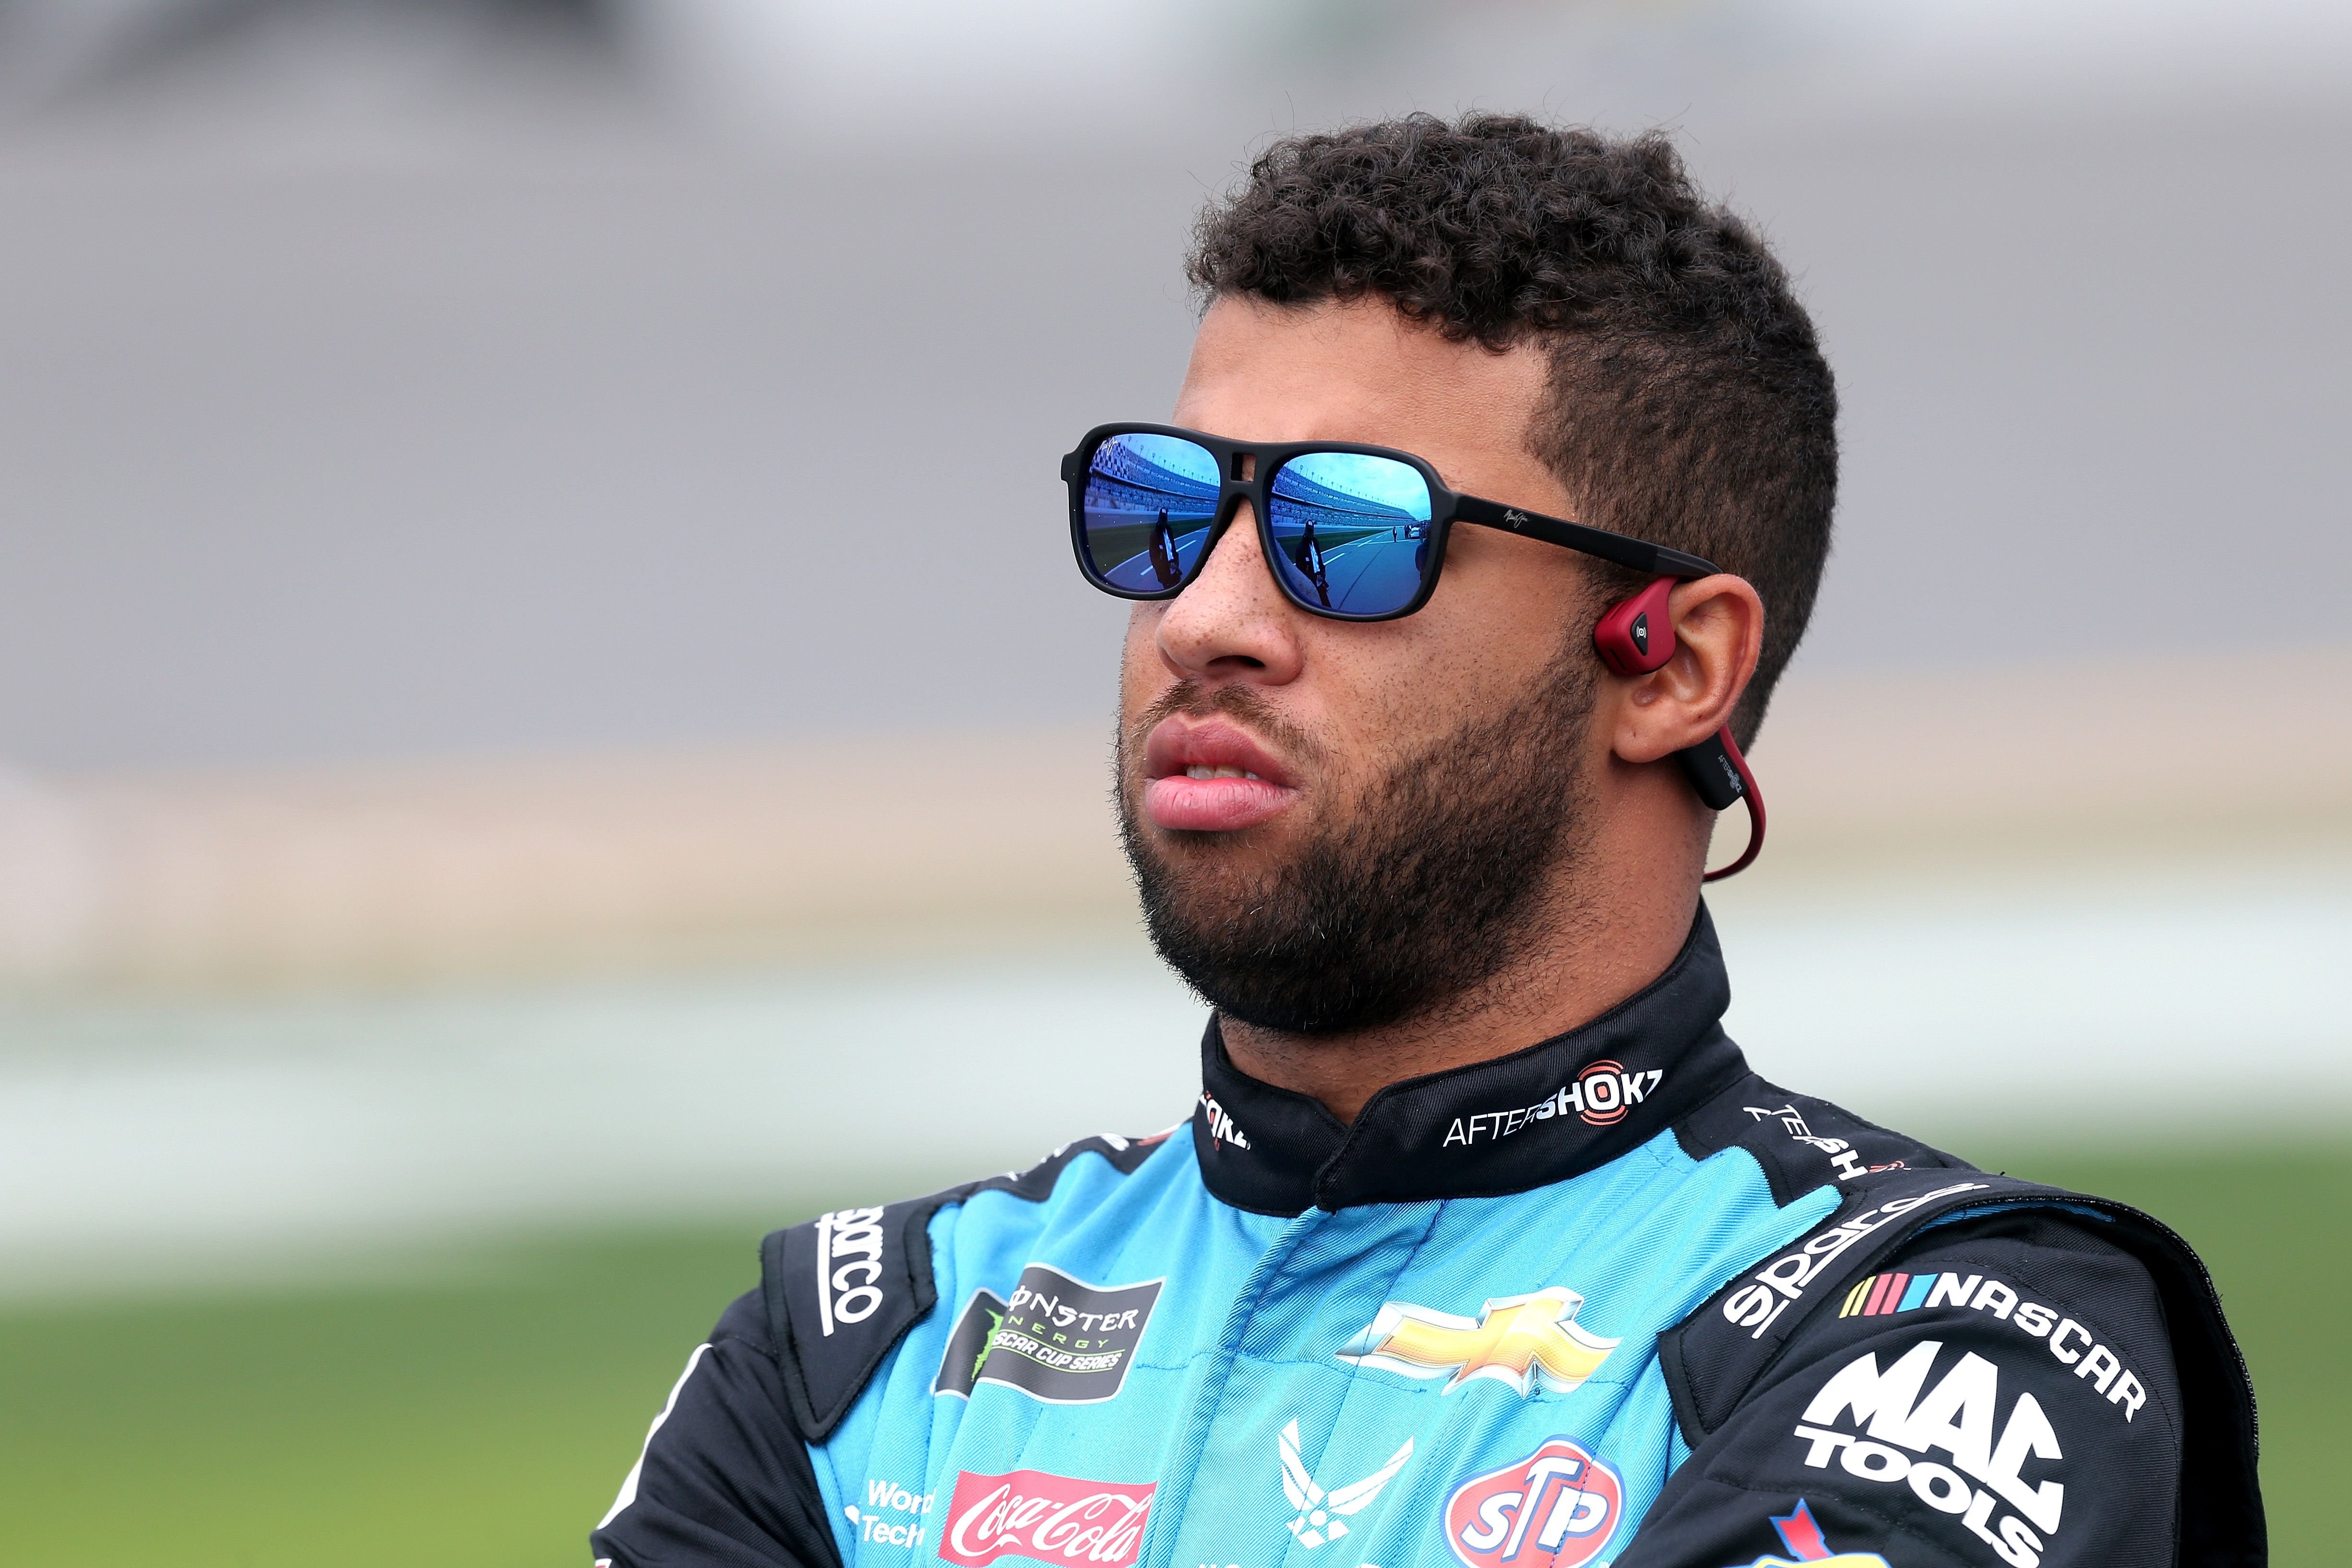 Bubba Wallace during the qualifications for the Monster Energy NASCAR Cup Series 61st Annual Daytona 500 at Daytona International Speedway at Daytona Beach, Florida | Photo: Jerry Markland/Getty Images